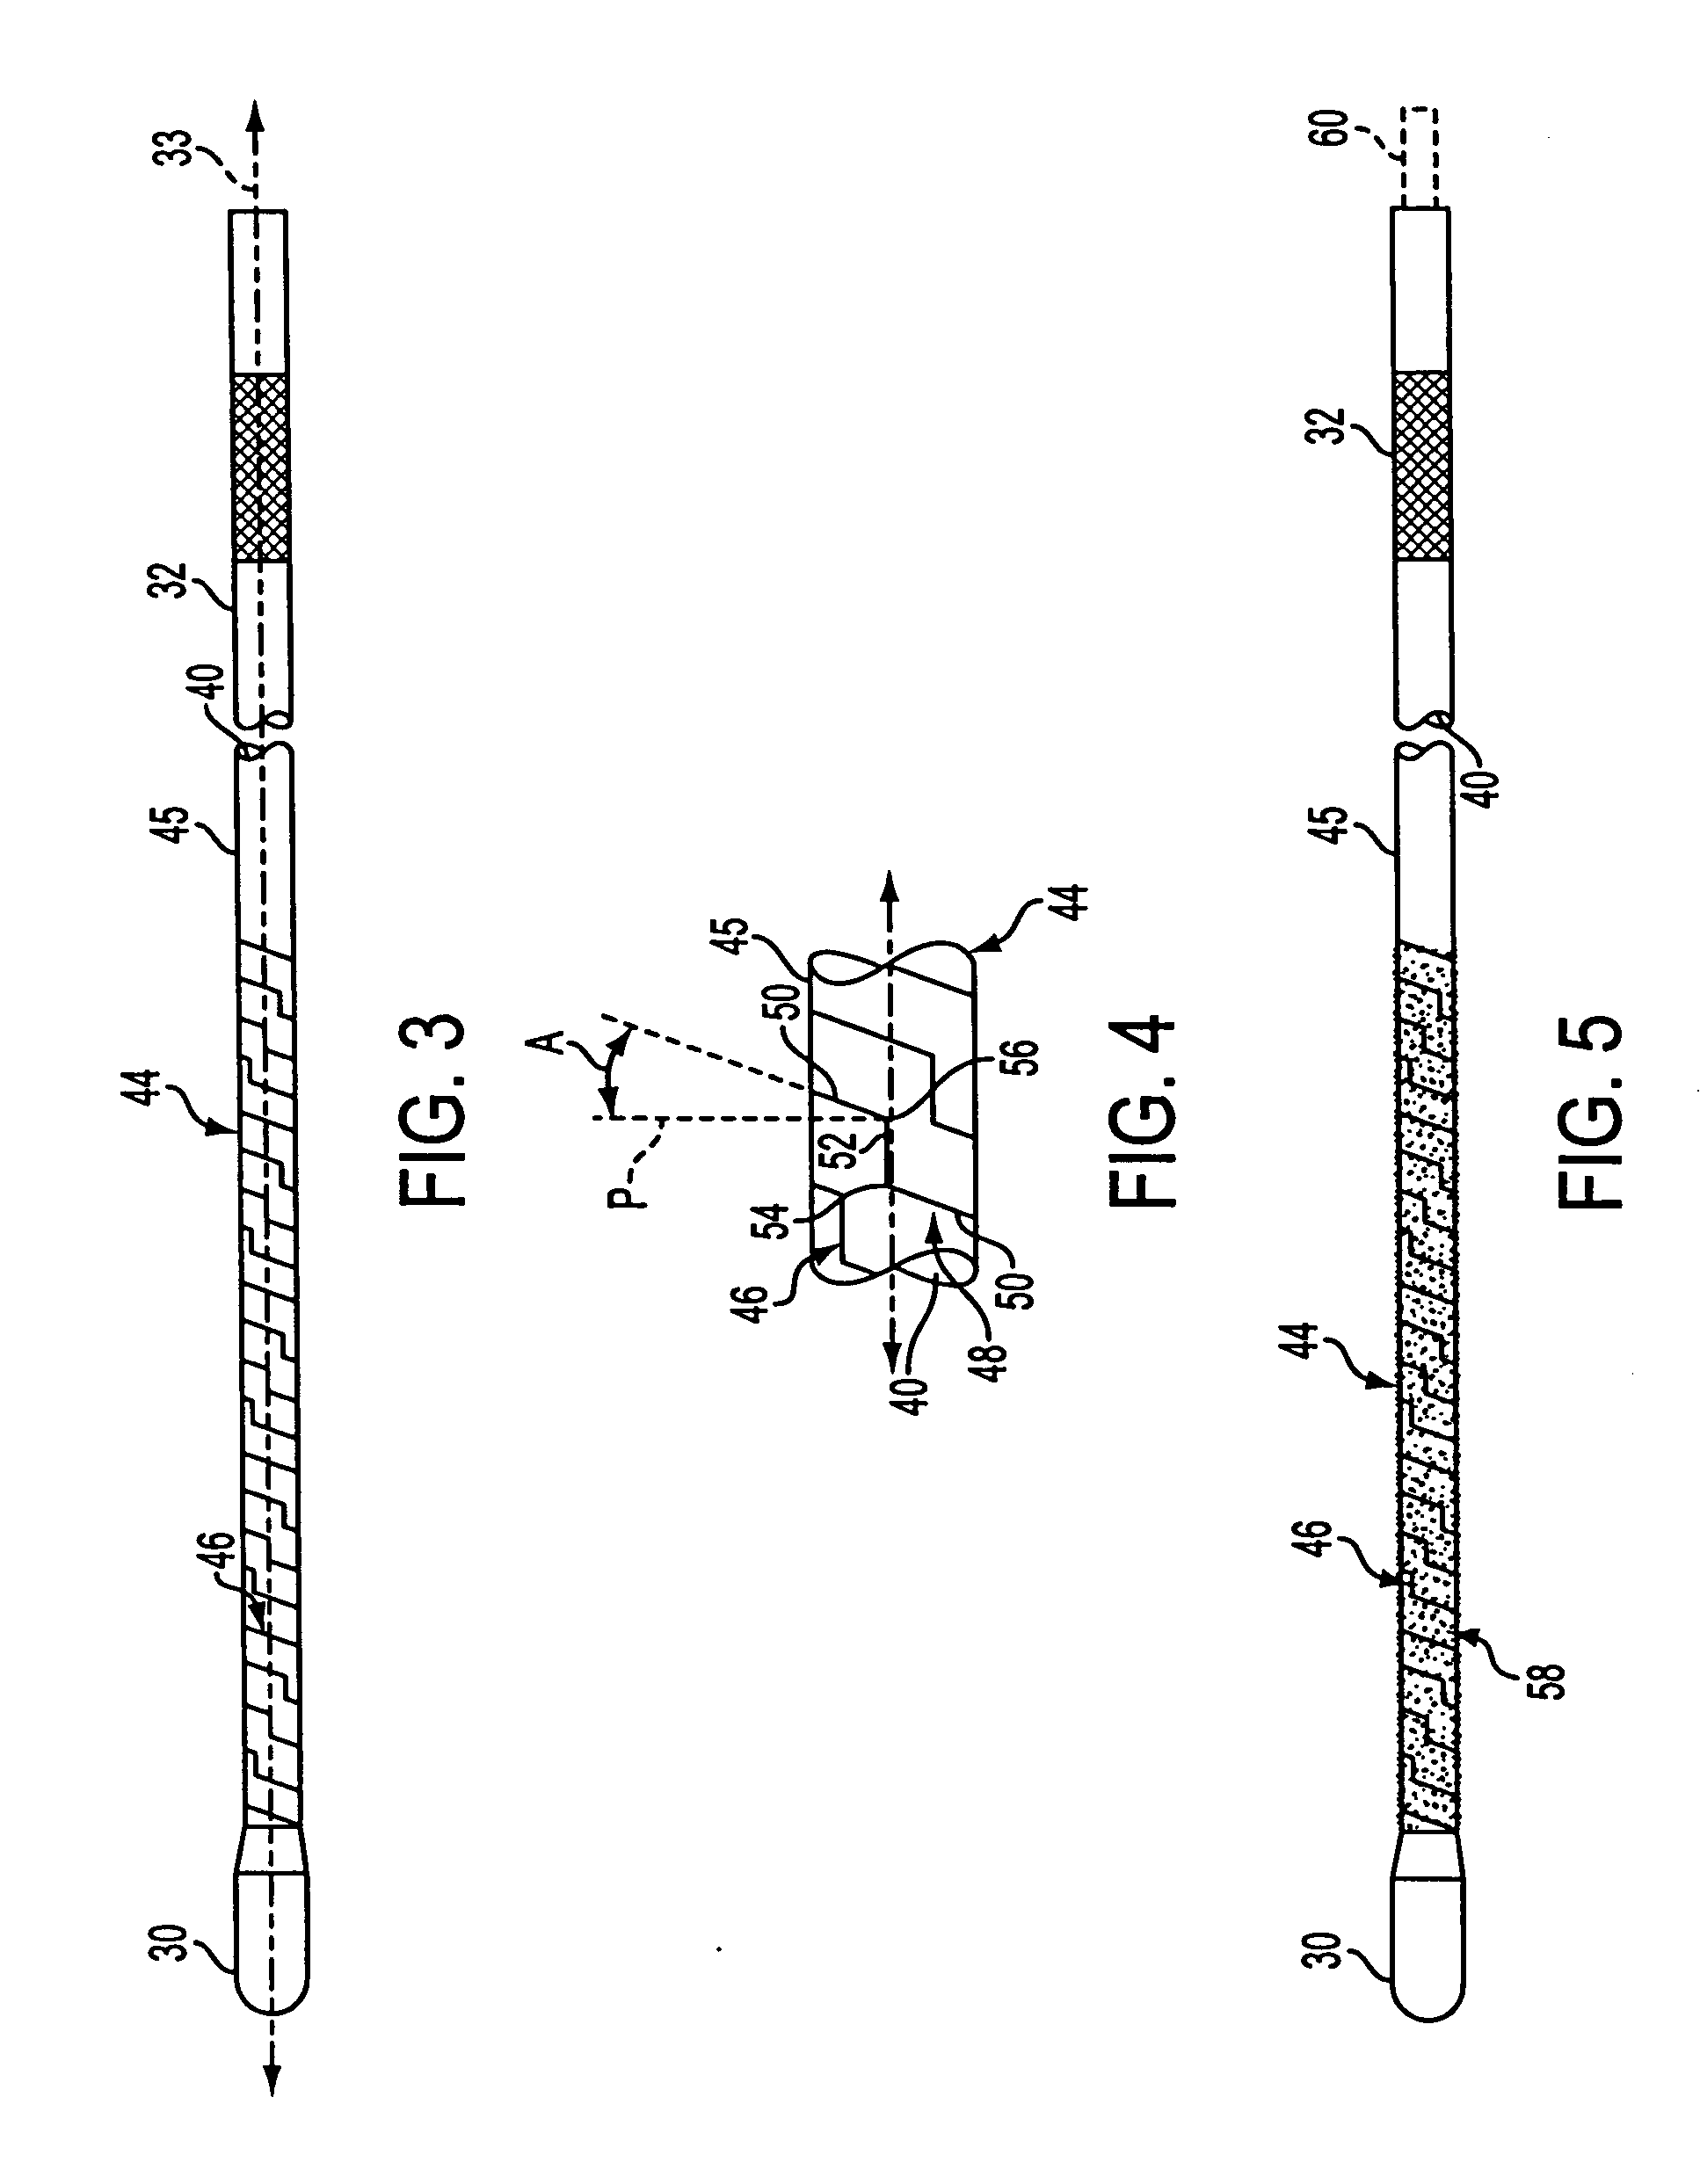 Angled tissue cutting instruments and method of fabricating angled tissue cutting instruments having flexible inner tubular members of tube and sleeve construction